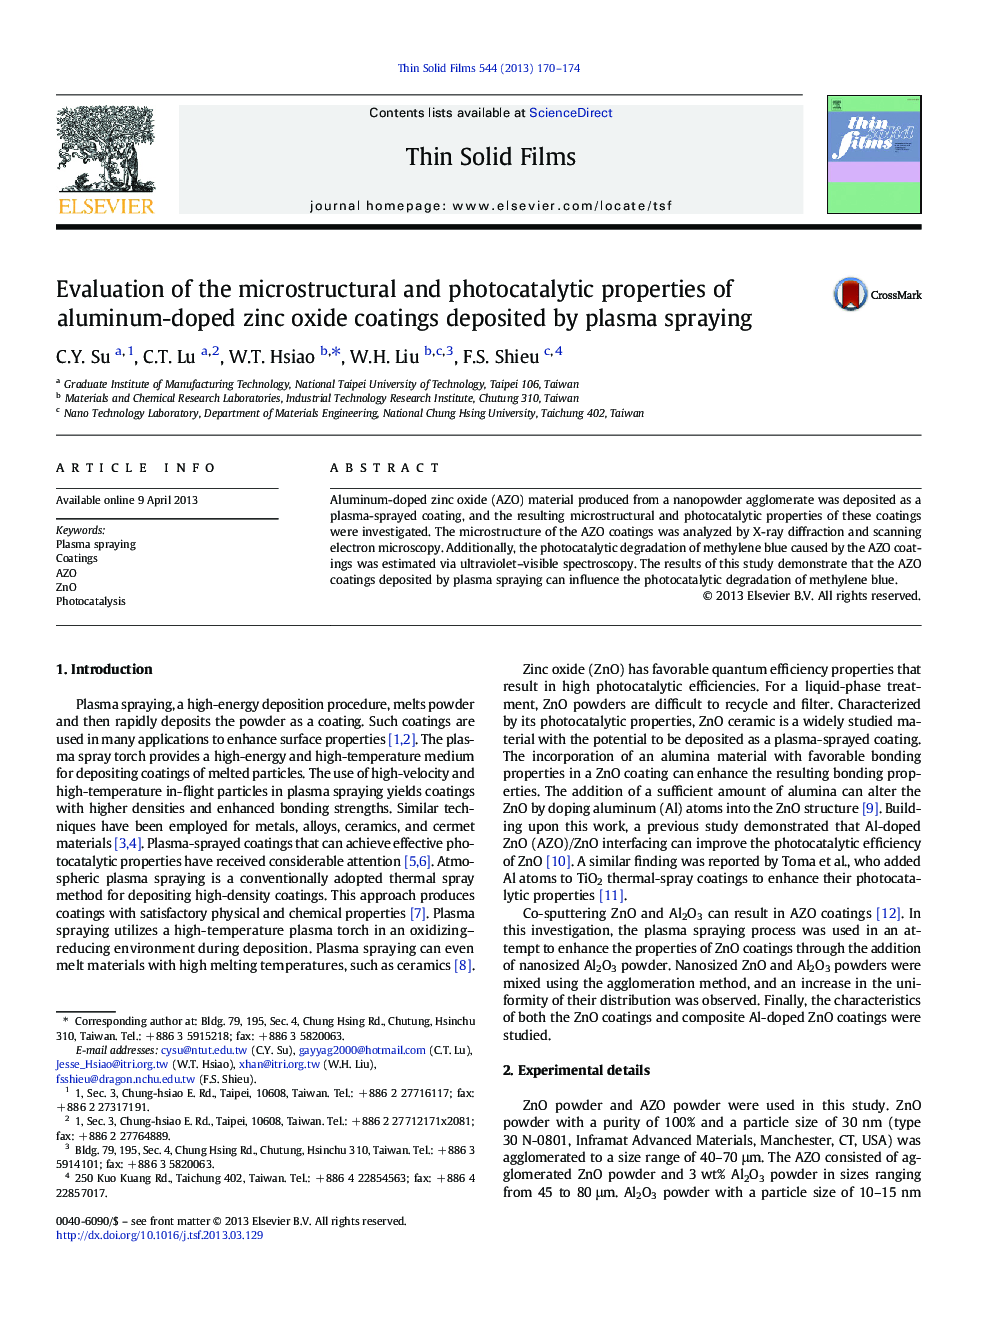 Evaluation of the microstructural and photocatalytic properties of aluminum-doped zinc oxide coatings deposited by plasma spraying